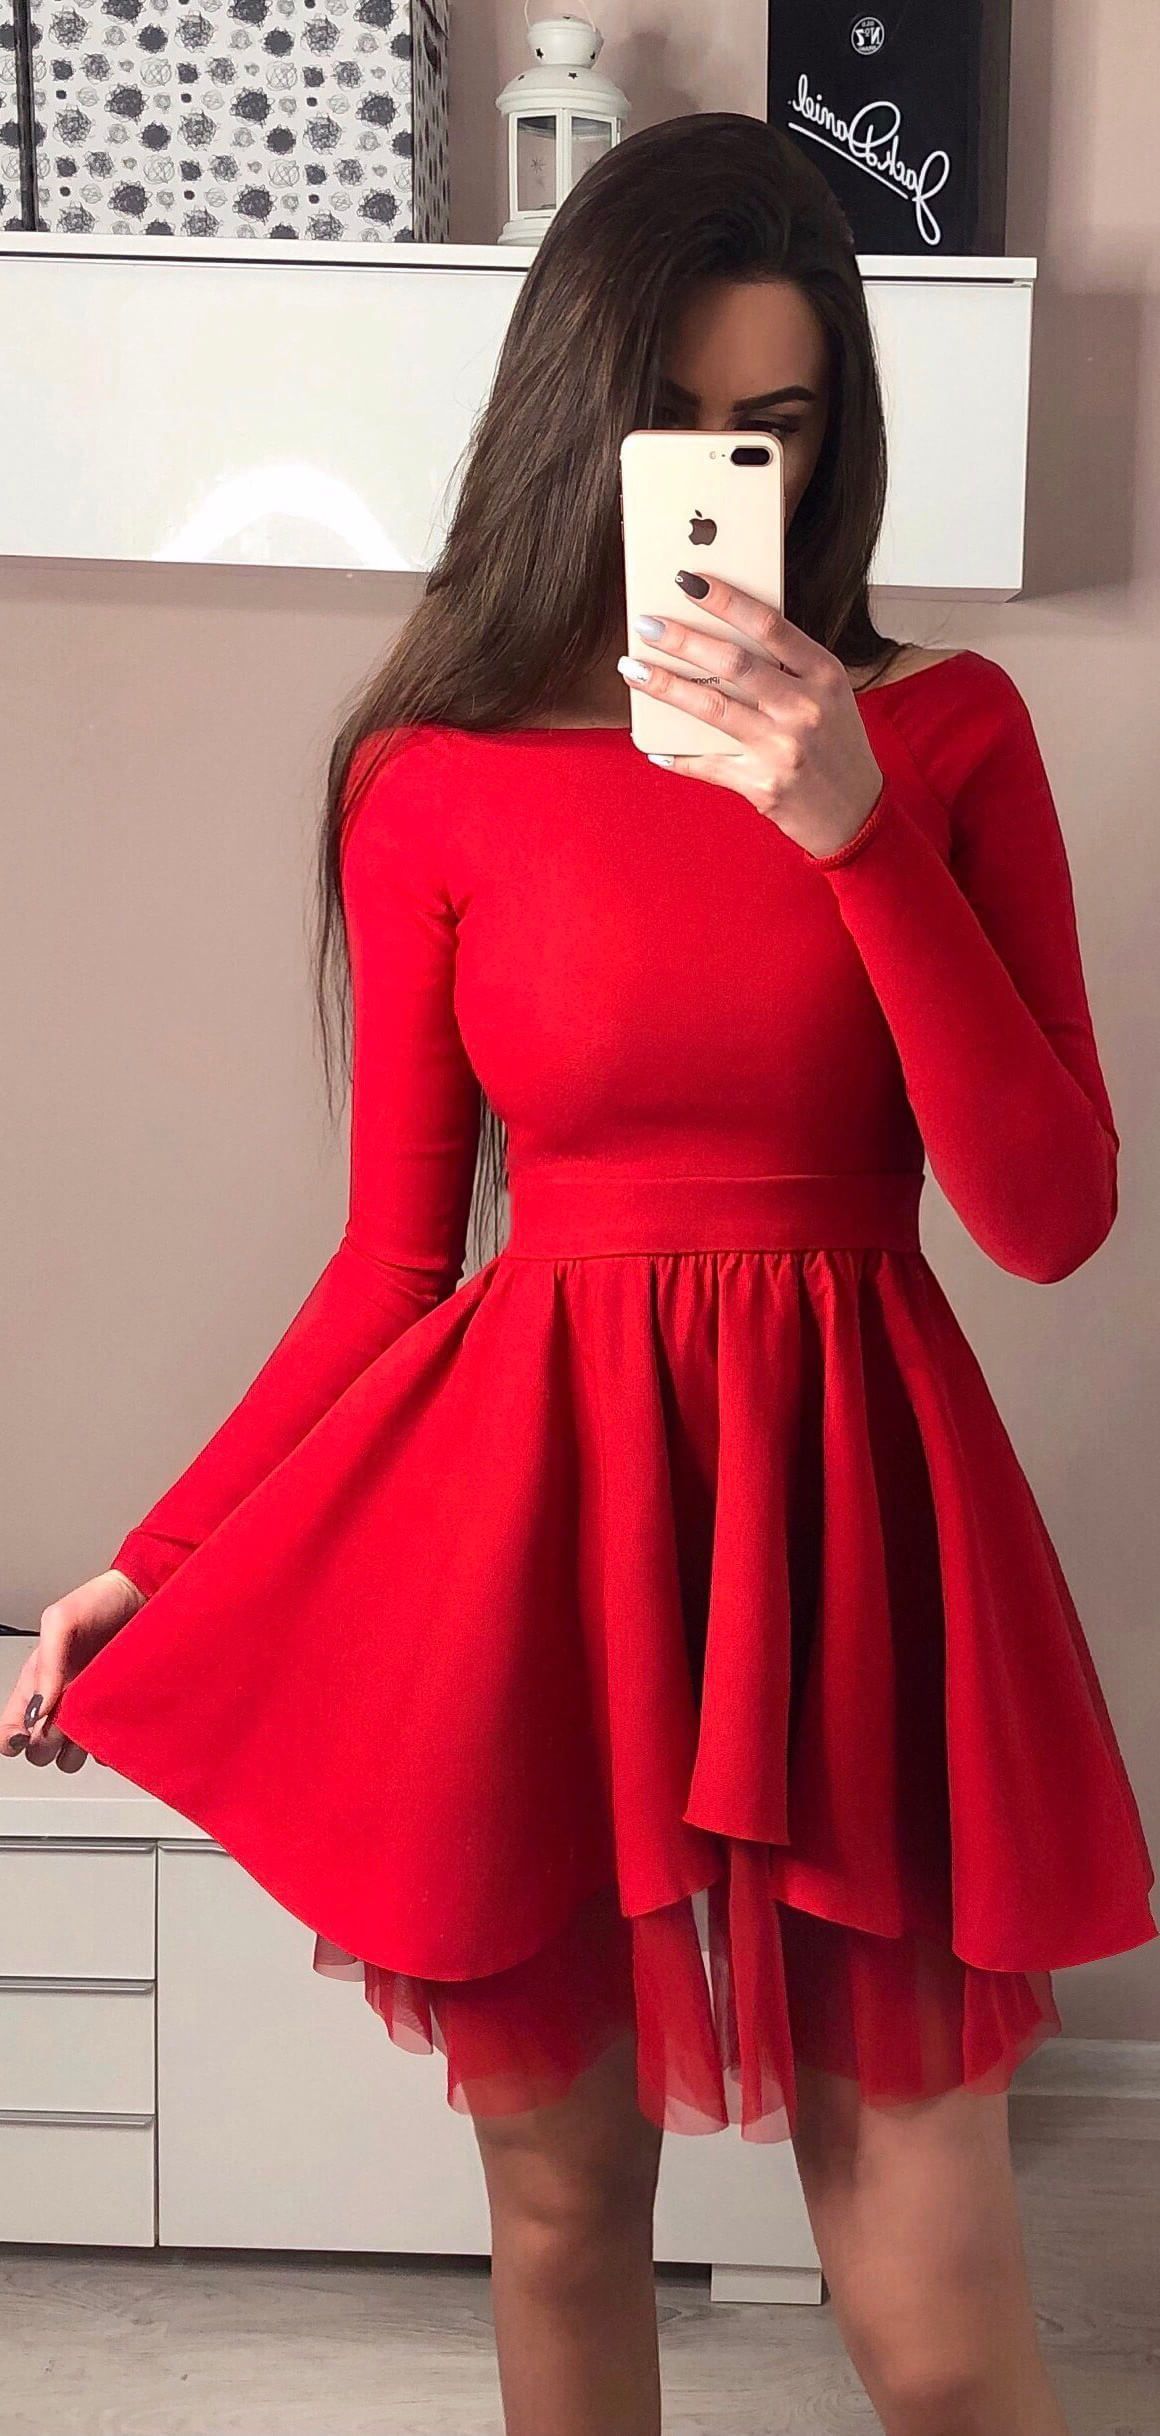 Long Sleeve Chic Short Party Dress Red Homecoming Dresses FD1299 $86.99 -   14 dress Homecoming christmas gifts ideas